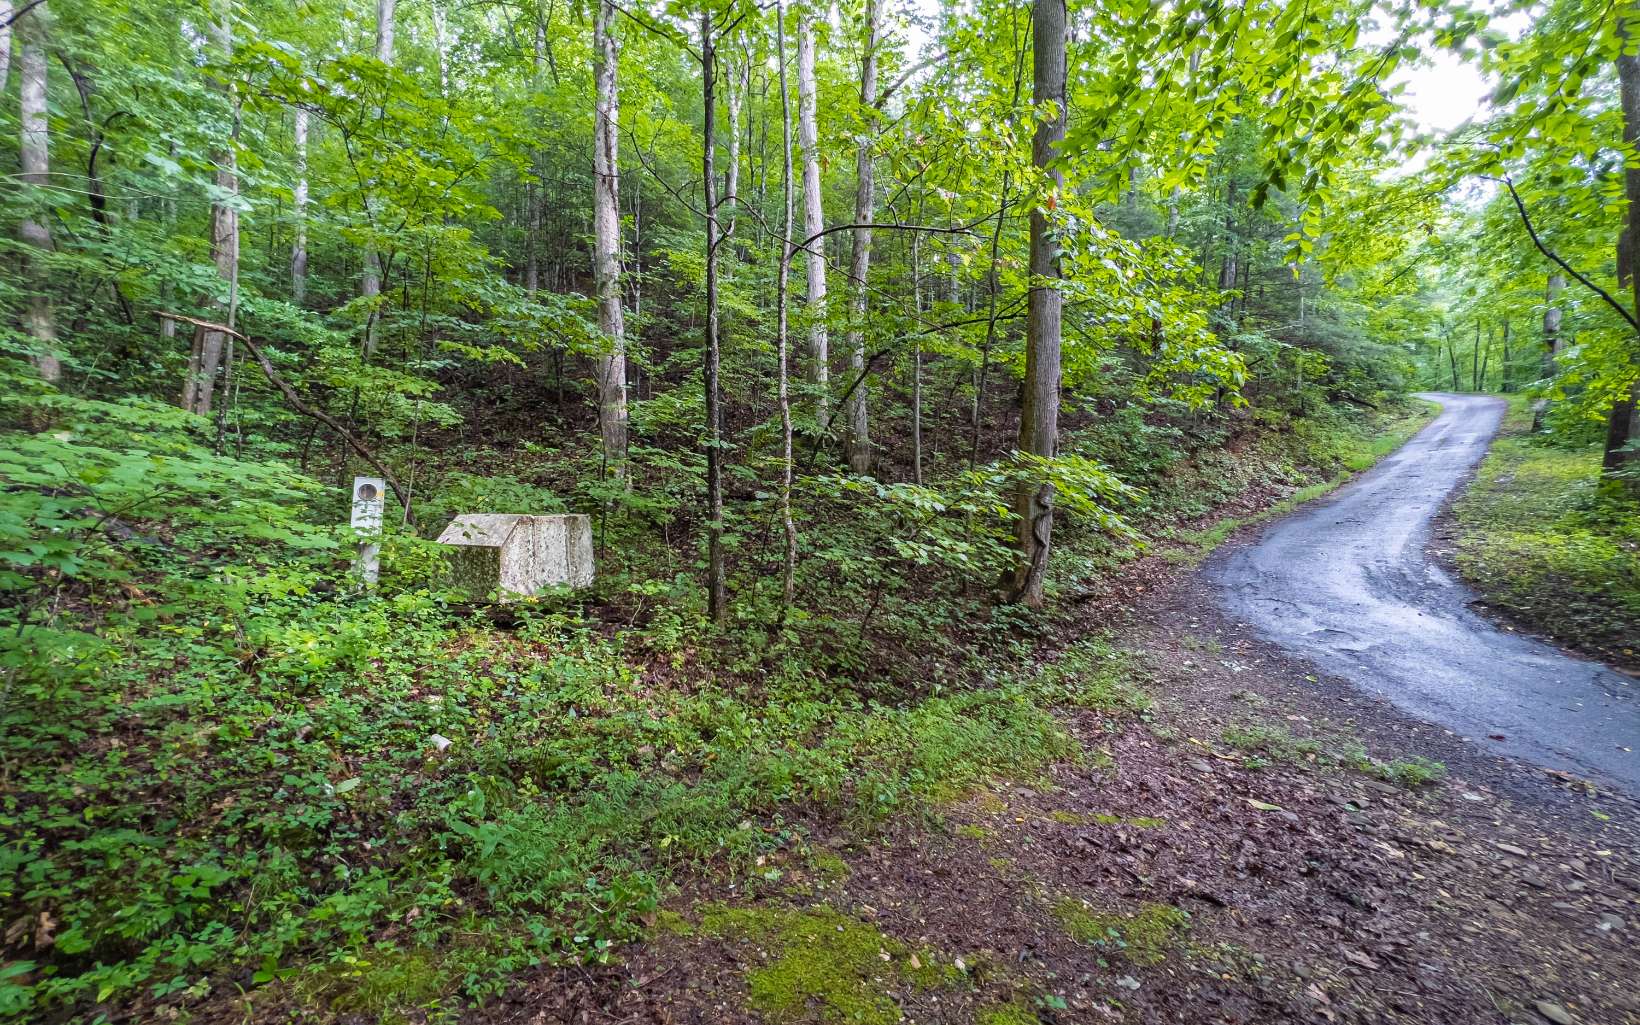 2.16 acres with underground utilities, water, phone, electric and all-paved access from the incredibly scenic White Oak Forest Road. This wooded lot is less than 5 miles from downtown Hiawassee, Lake Chatuge access and Towns County schools. The attraction-packed Helen, GA is less than 20 miles away, and in between are waterfalls, hiking trails (Appalachian Trail access), and camping and fishing areas! If you're looking for a safe and very neighborly place to build your mountain getaway or full-time residence, then this lot is for you.